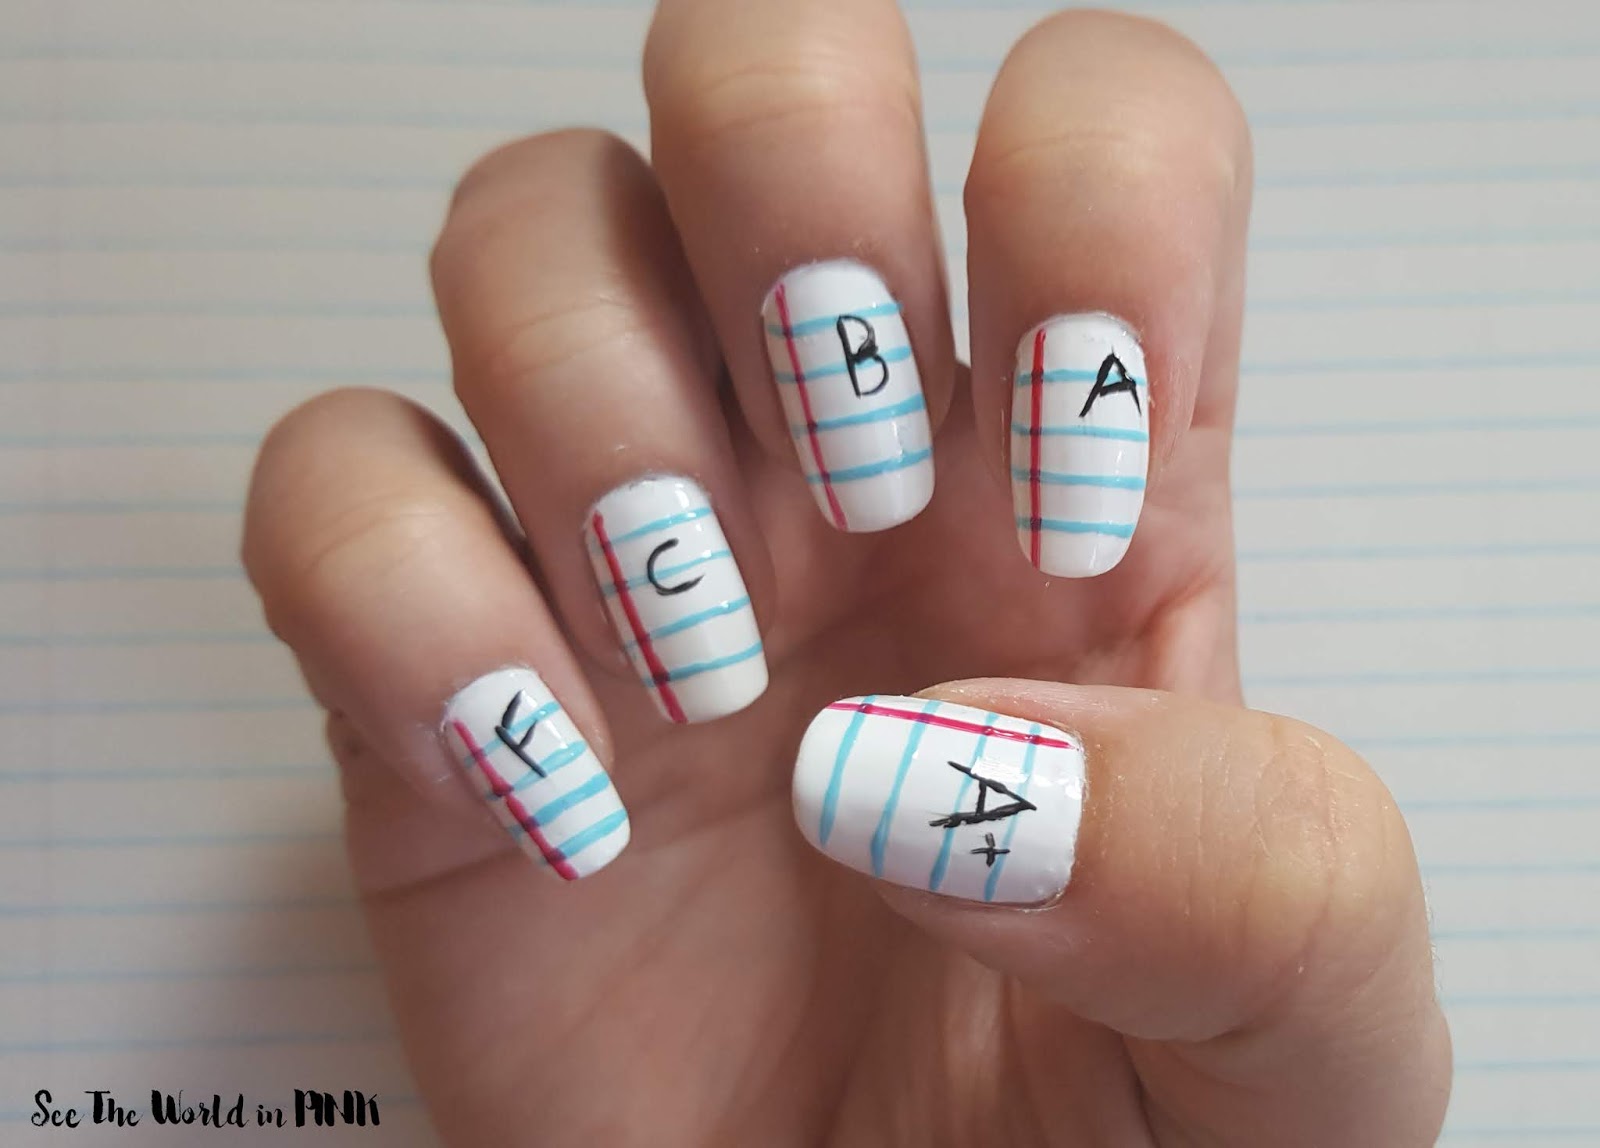 Colored pencil nails are the craziest back-to-school look we didn't ask for  | whas11.com